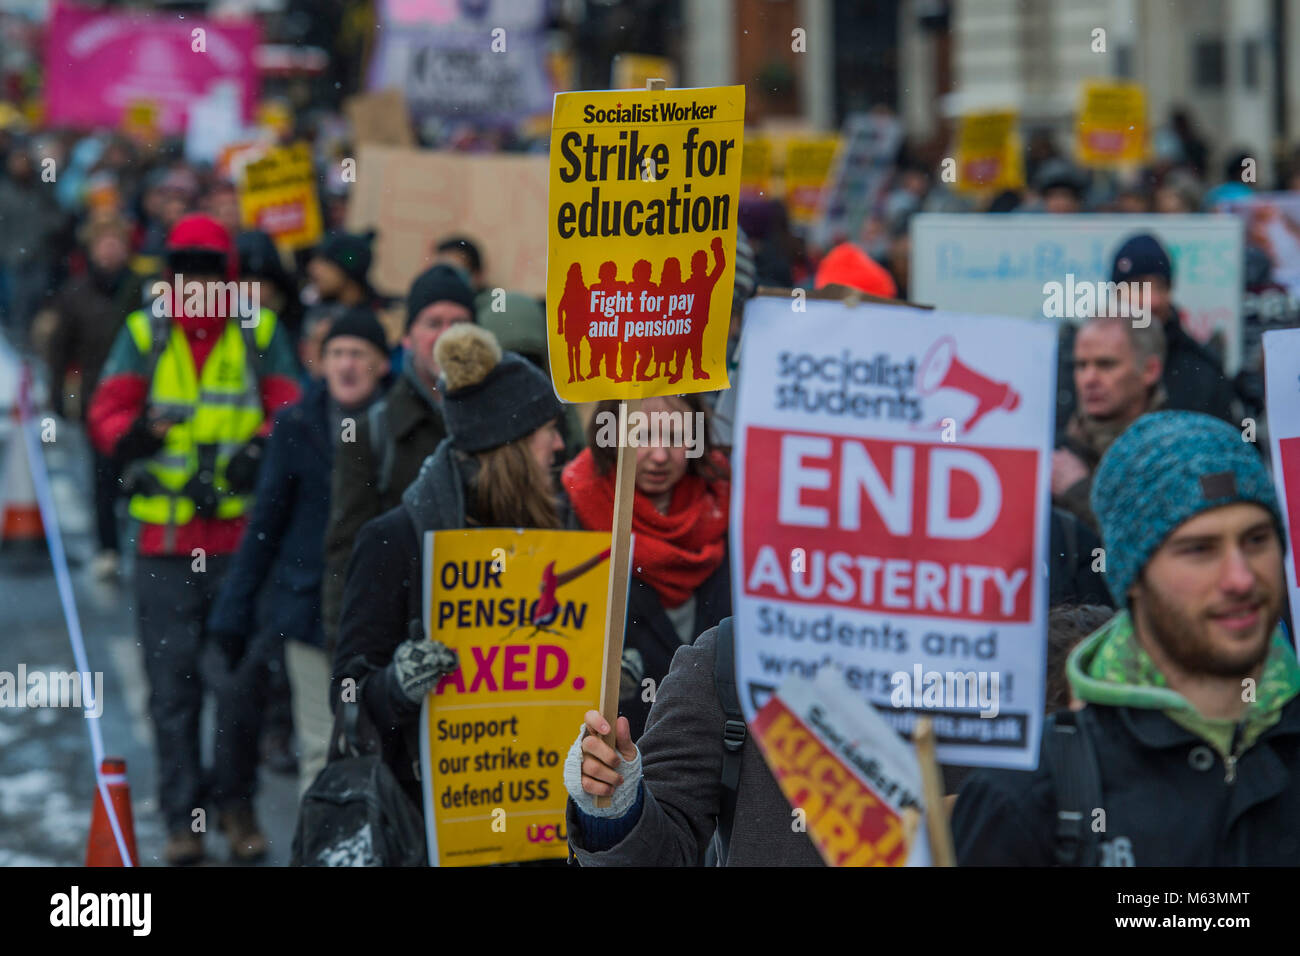 London, UK. 28th February, 2018. The UCU (University and College Union) organises a march to protest the changes to lecturers pensions as part of their strike action. The march started outside UCL in Malet Place andheaded to Westminster via Whitehall. Credit: Guy Bell/Alamy Live News Stock Photo